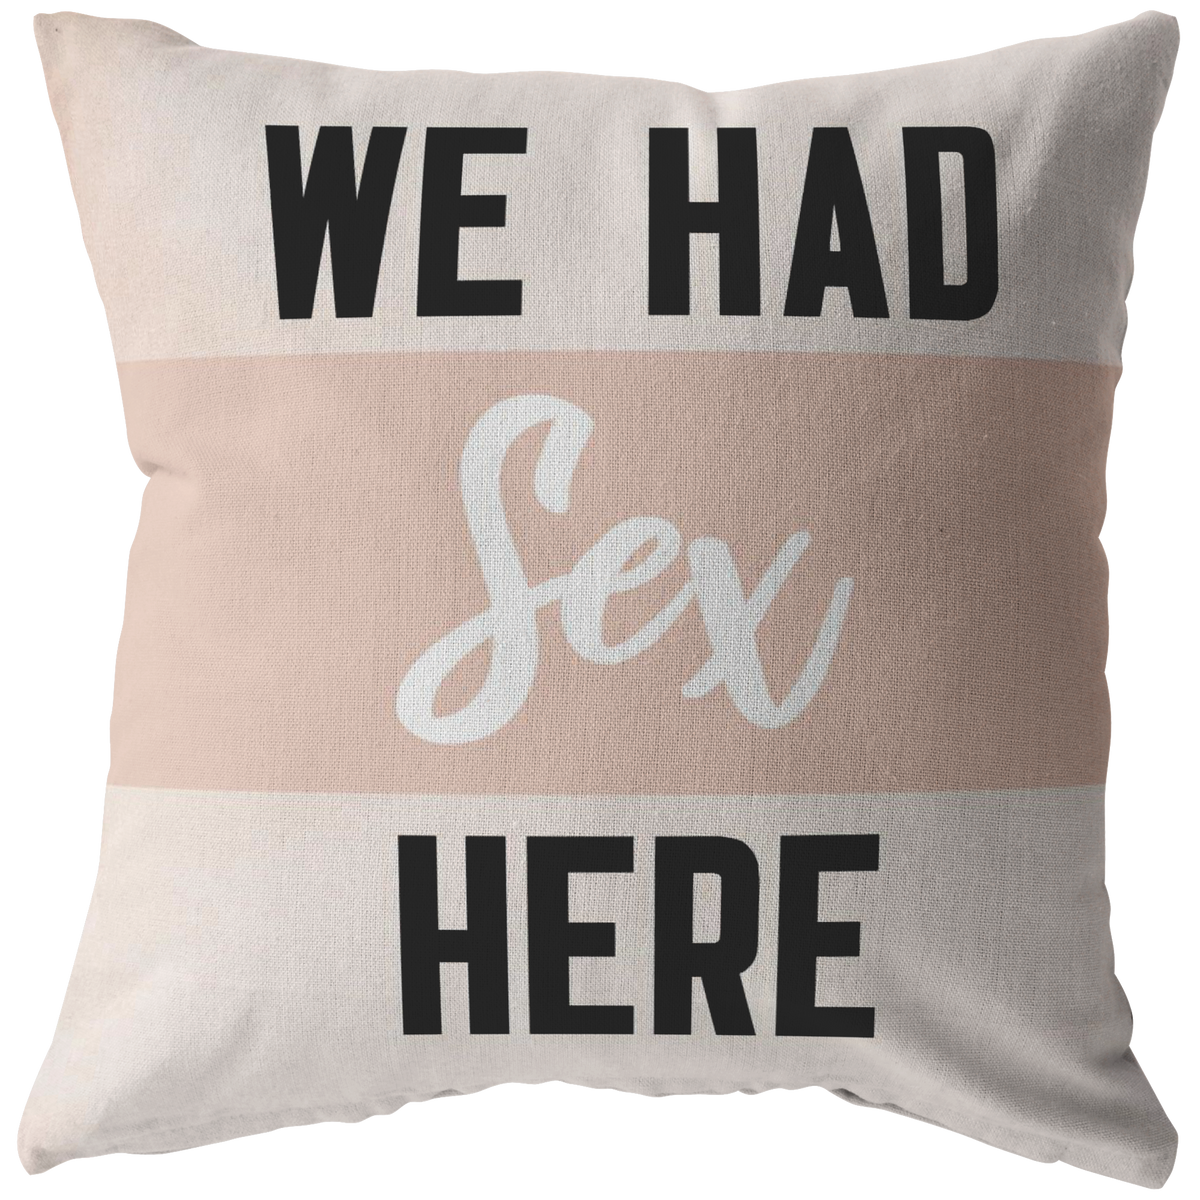 We Had Sex Here Pillow